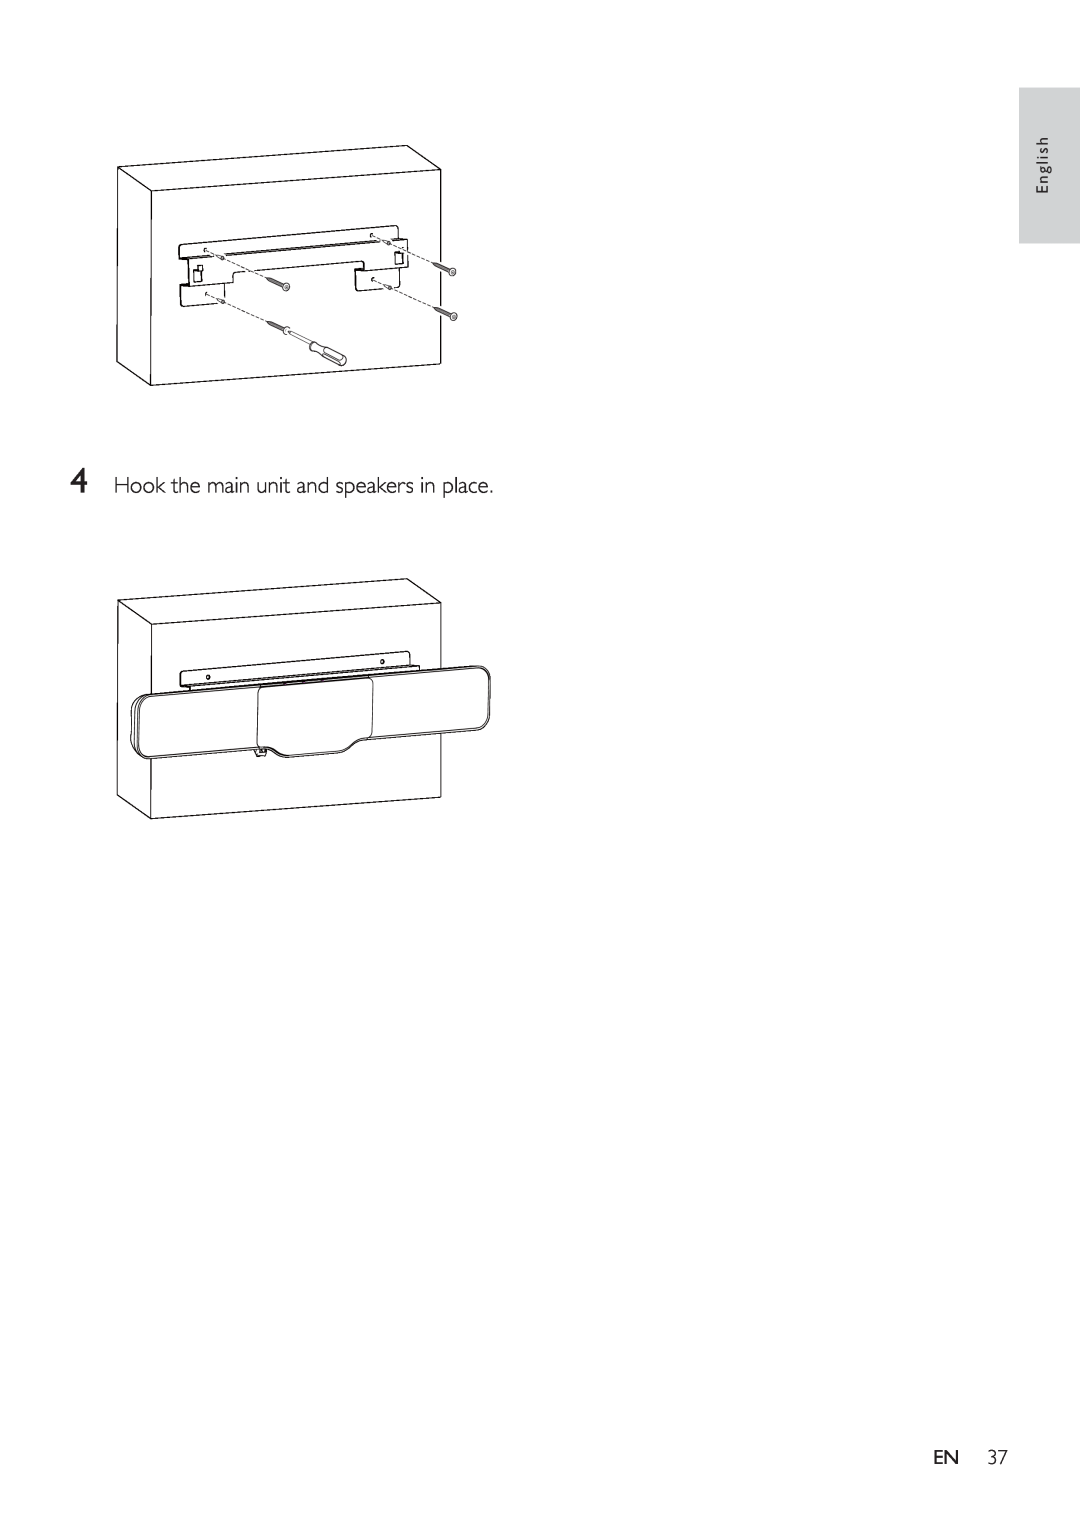 Philips HSB4383/12 user manual 4Hook the main unit and speakers in place, English 